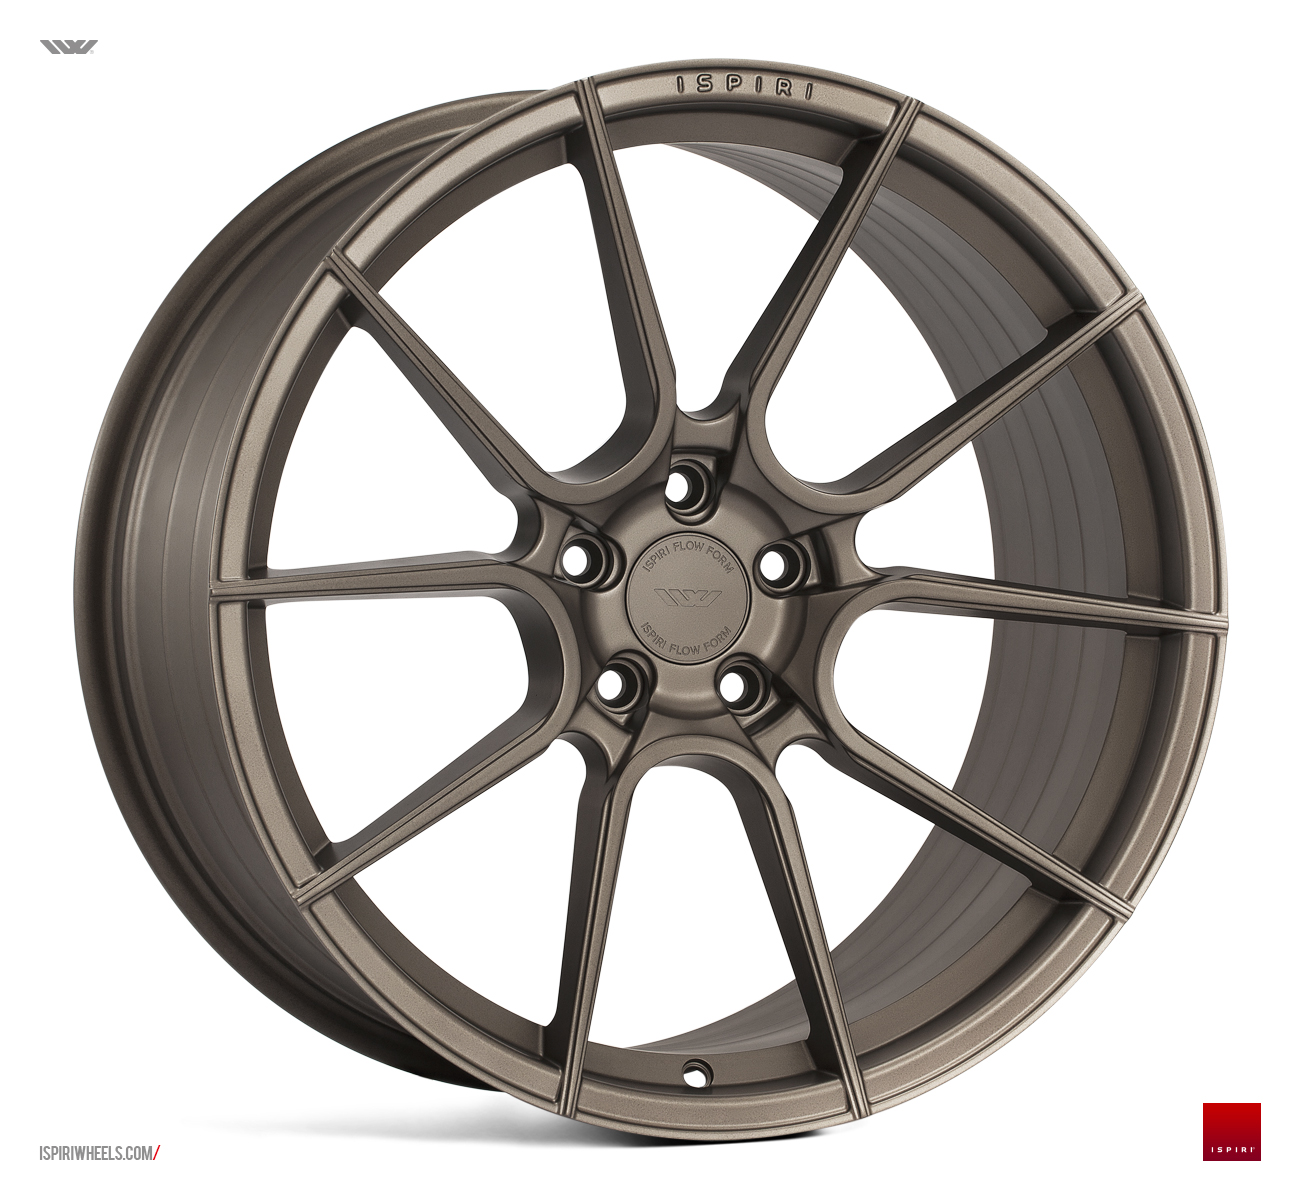 NEW 19" ISPIRI FFR6 TWIN 5 SPOKE ALLOY WHEELS IN MATT CARBON BRONZE, VARIOUS FITMENTS AVAILABLE